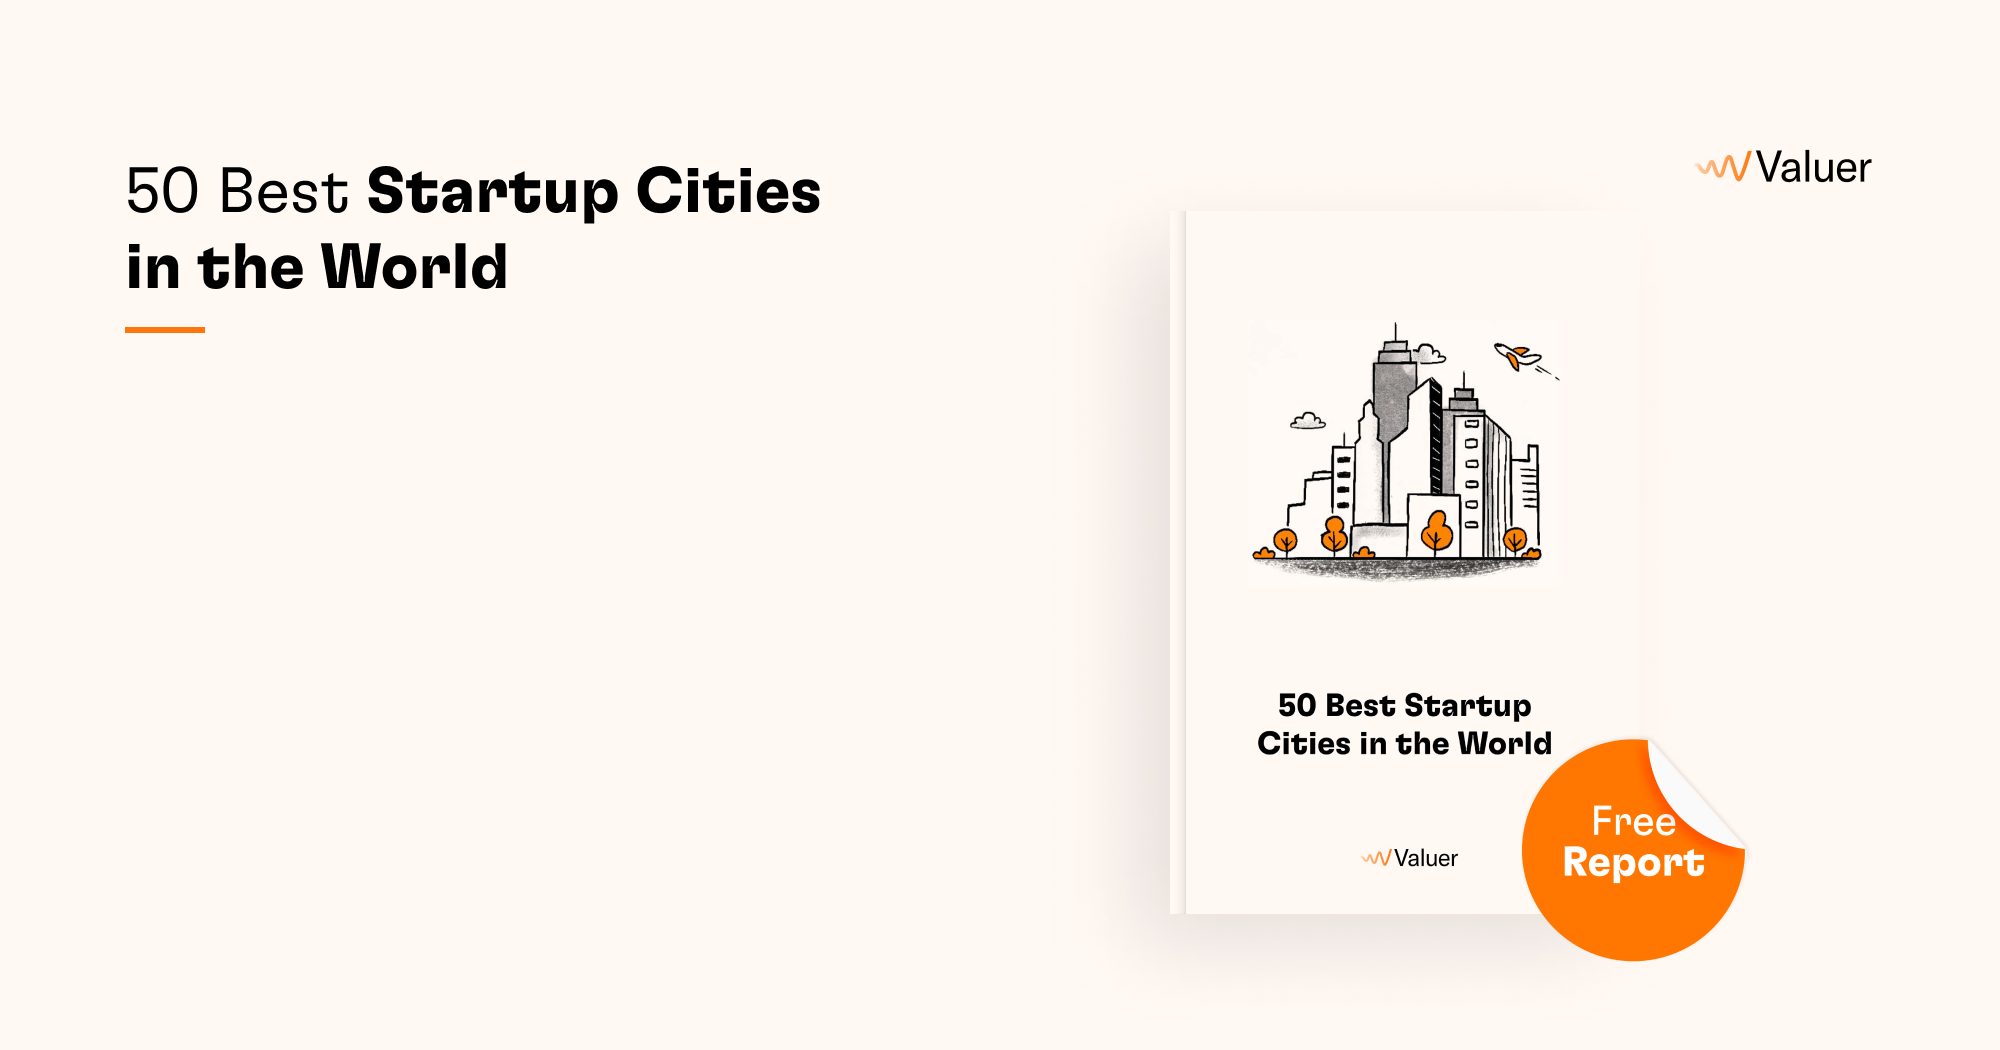 The 50 Best Startup Cities